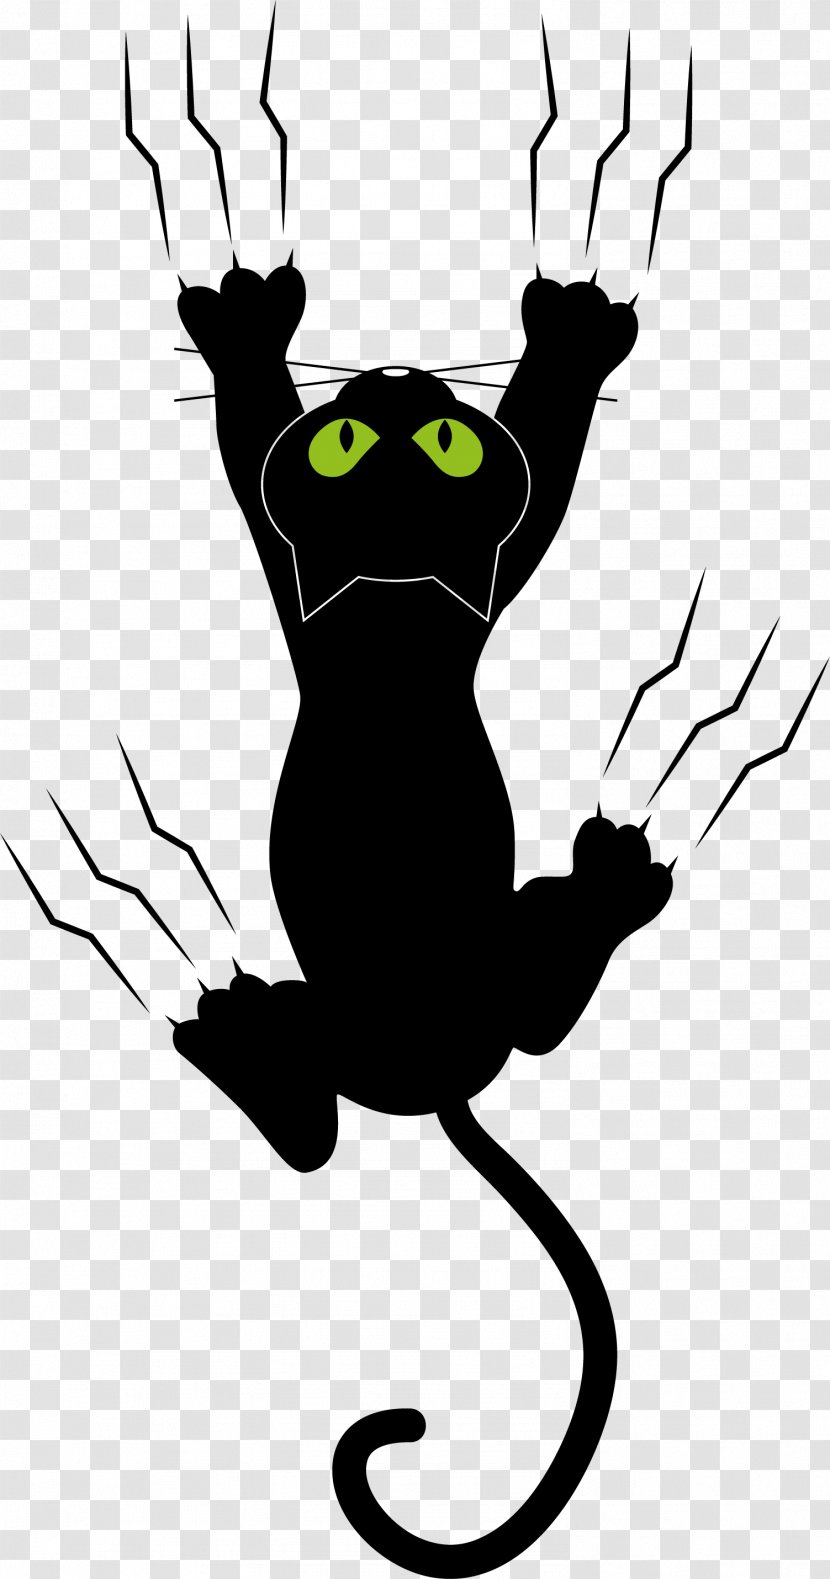 Cat Kitten Dog Paw - Fictional Character - The Black Cat's Claw Marks Transparent PNG